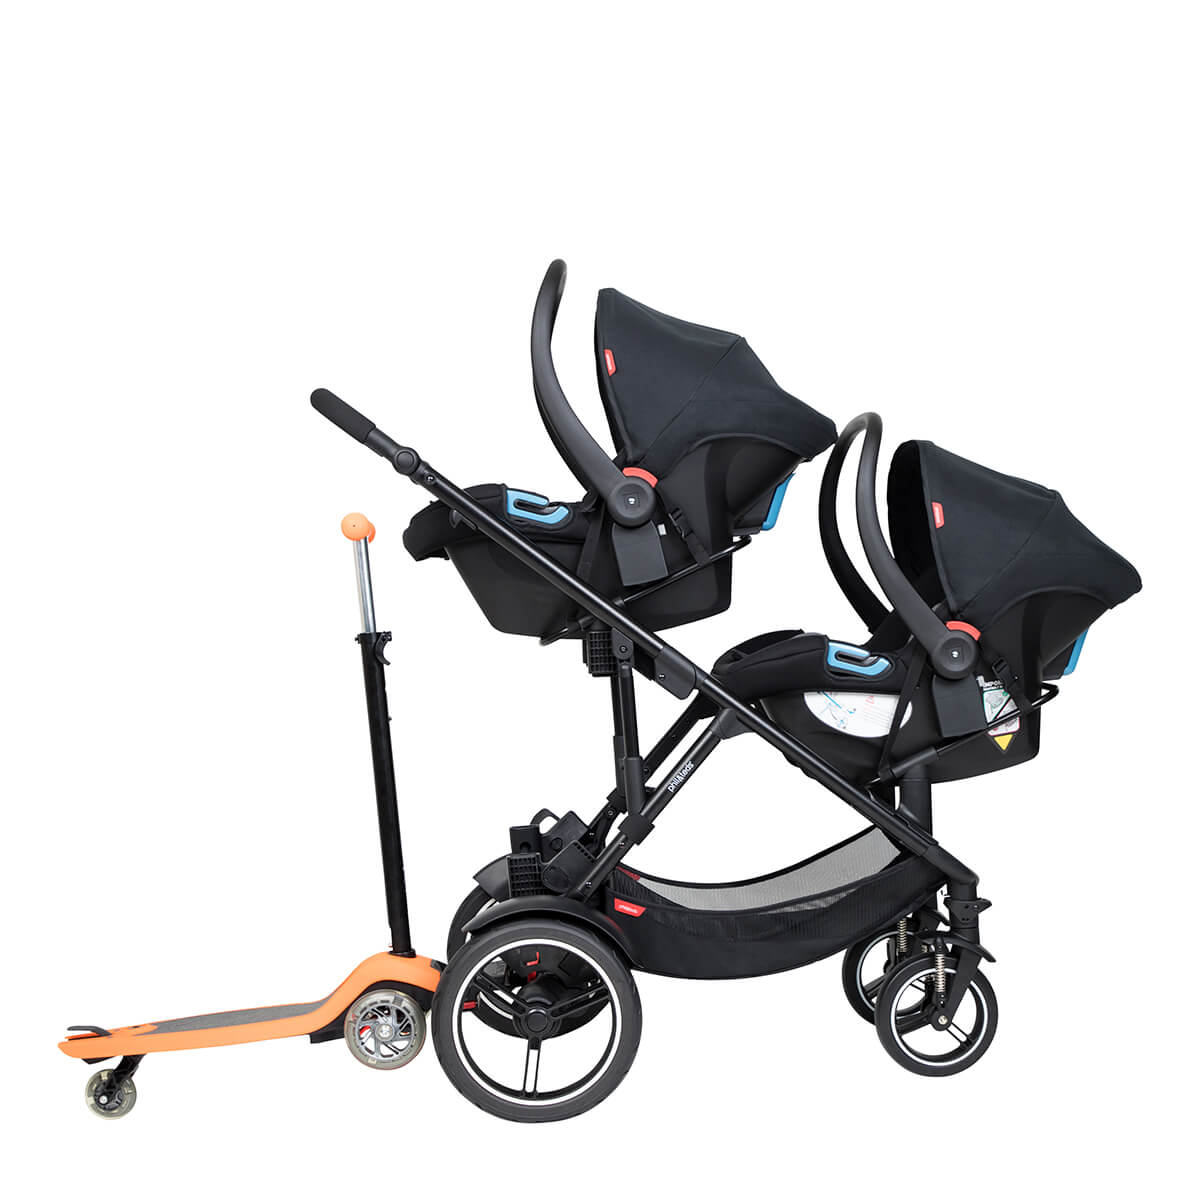 https://cdn.accentuate.io/4509528850520/19272835367000/philteds-voyager-poussette-with-double-travel-systems-and-freerider-stroller-board-in-the-rear-v1626484588681.jpg?1200x1200